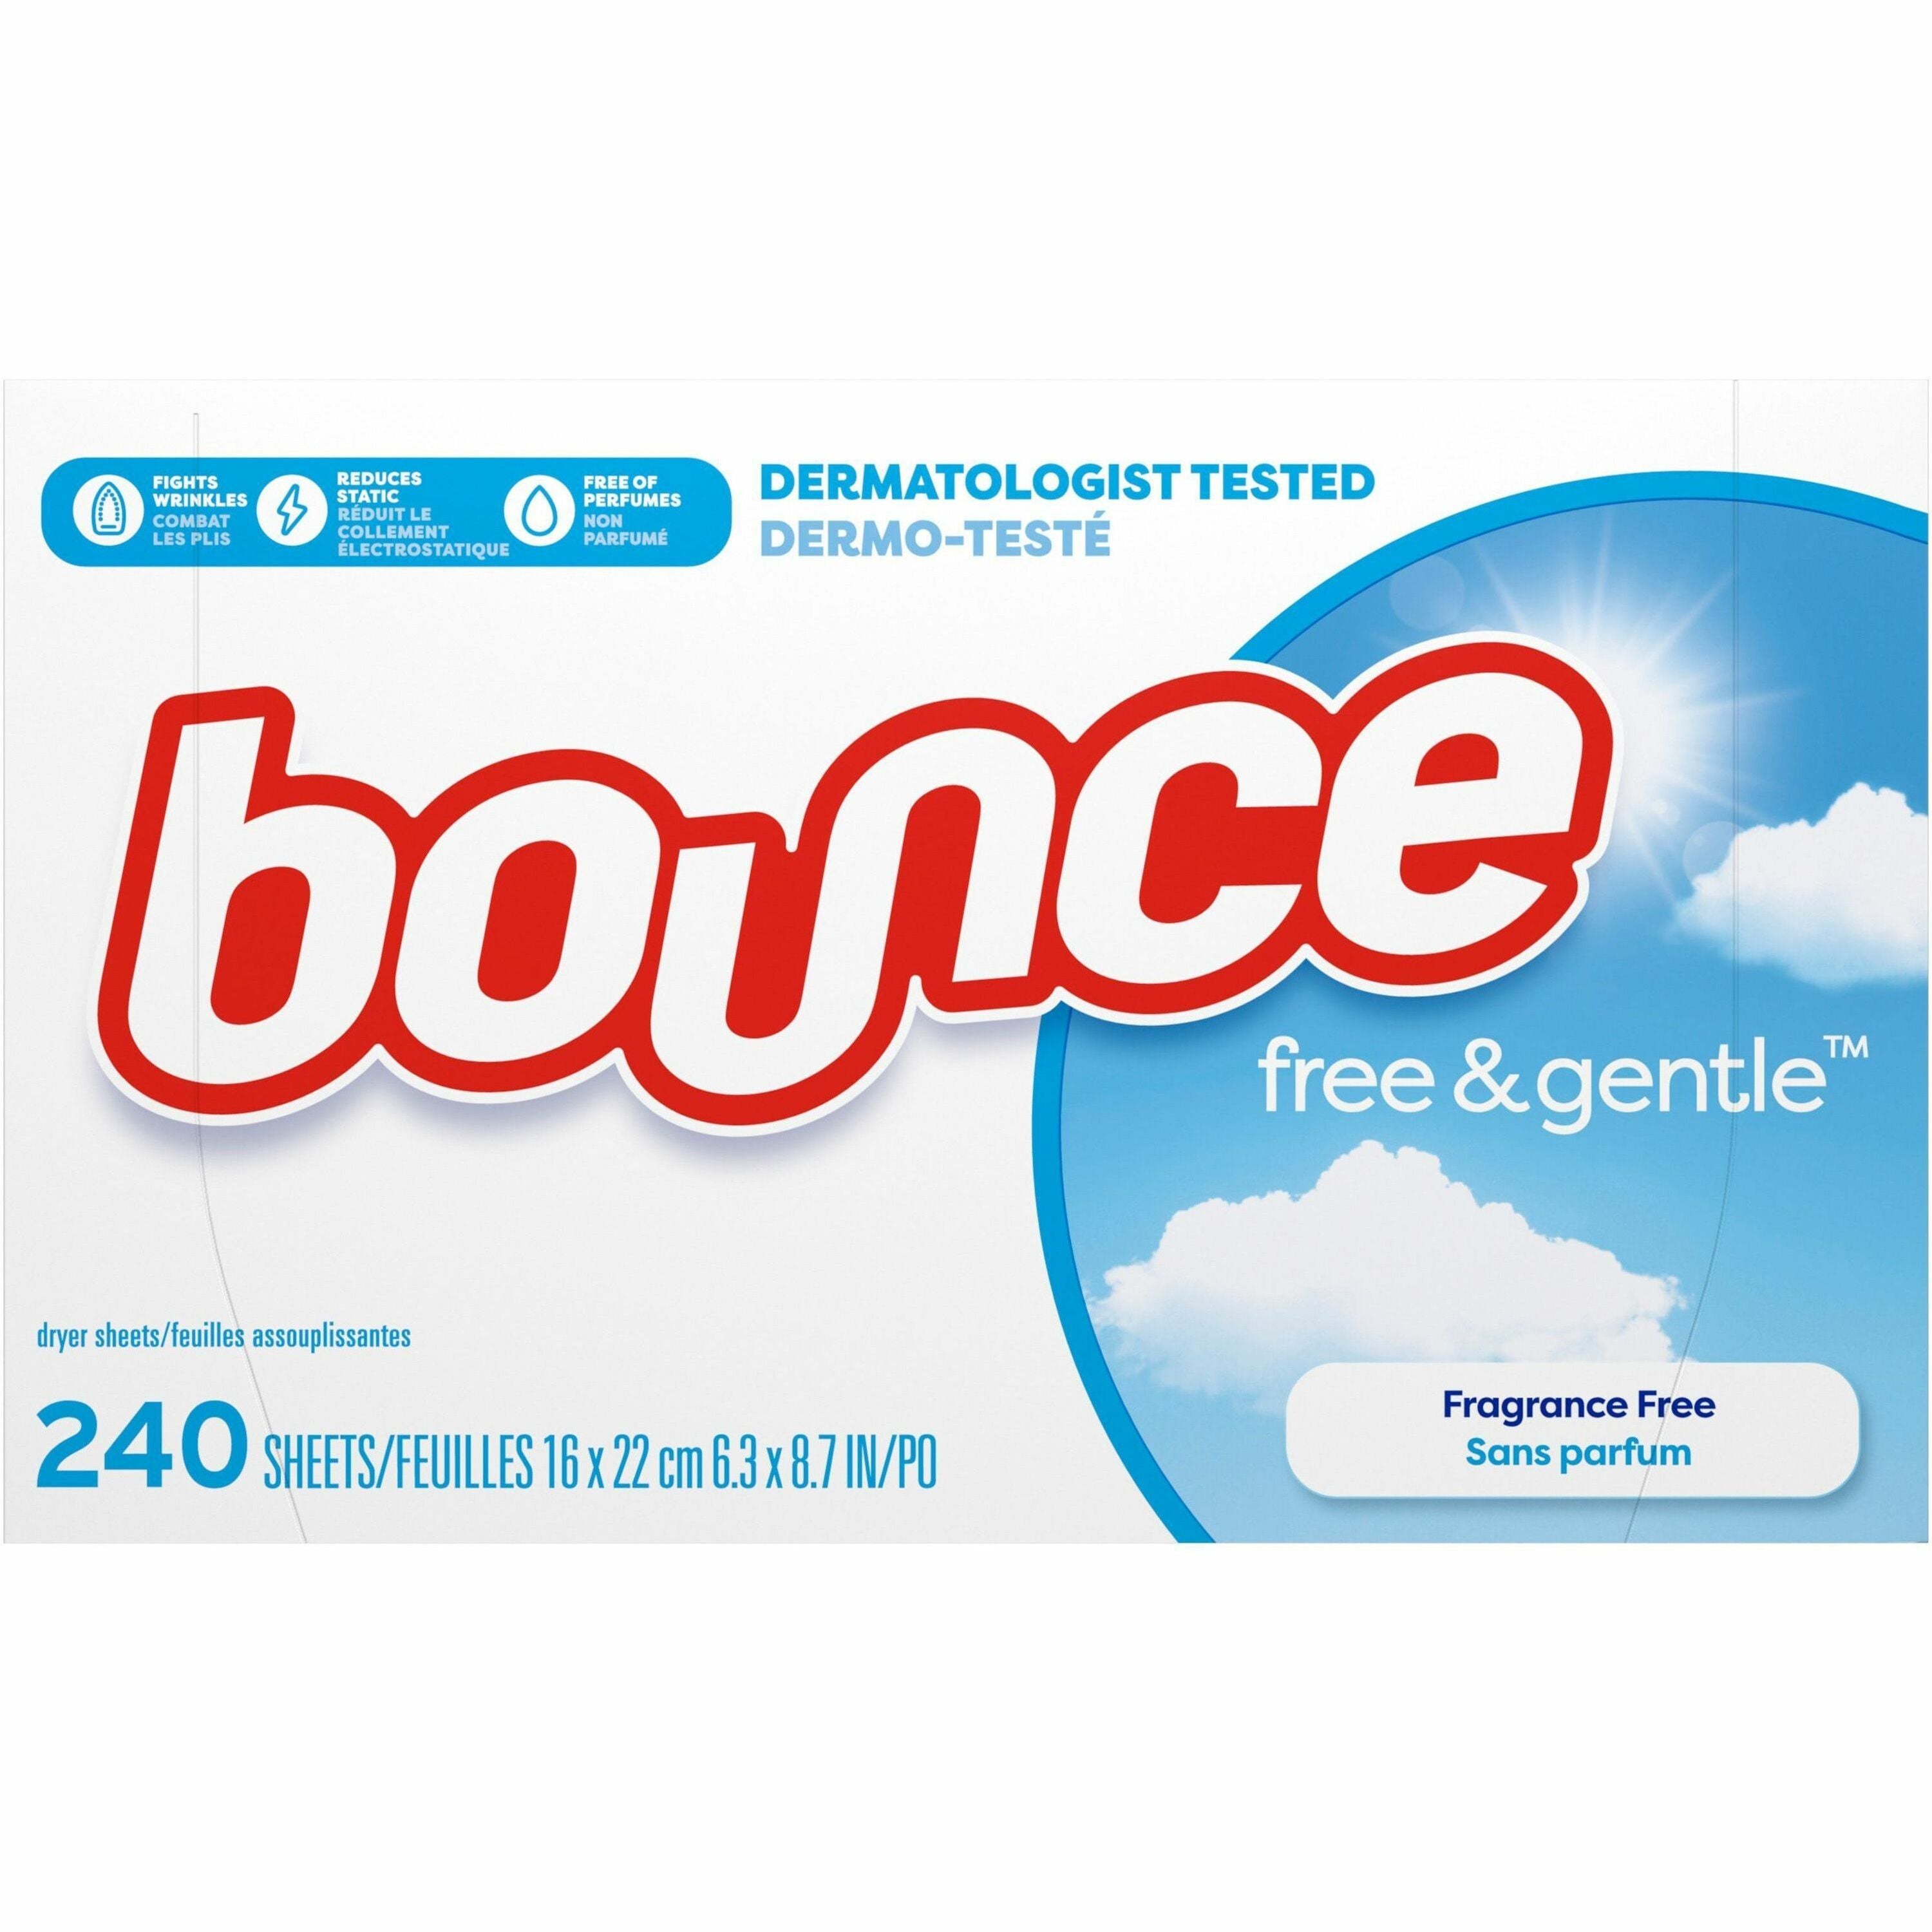 bounce-free-&-gentle-dryer-sheets-9-length-x-604-width-240-box-dye-free-scent-free-wrinkle-free-hypoallergenic-soft-white_pgc55312 - 1